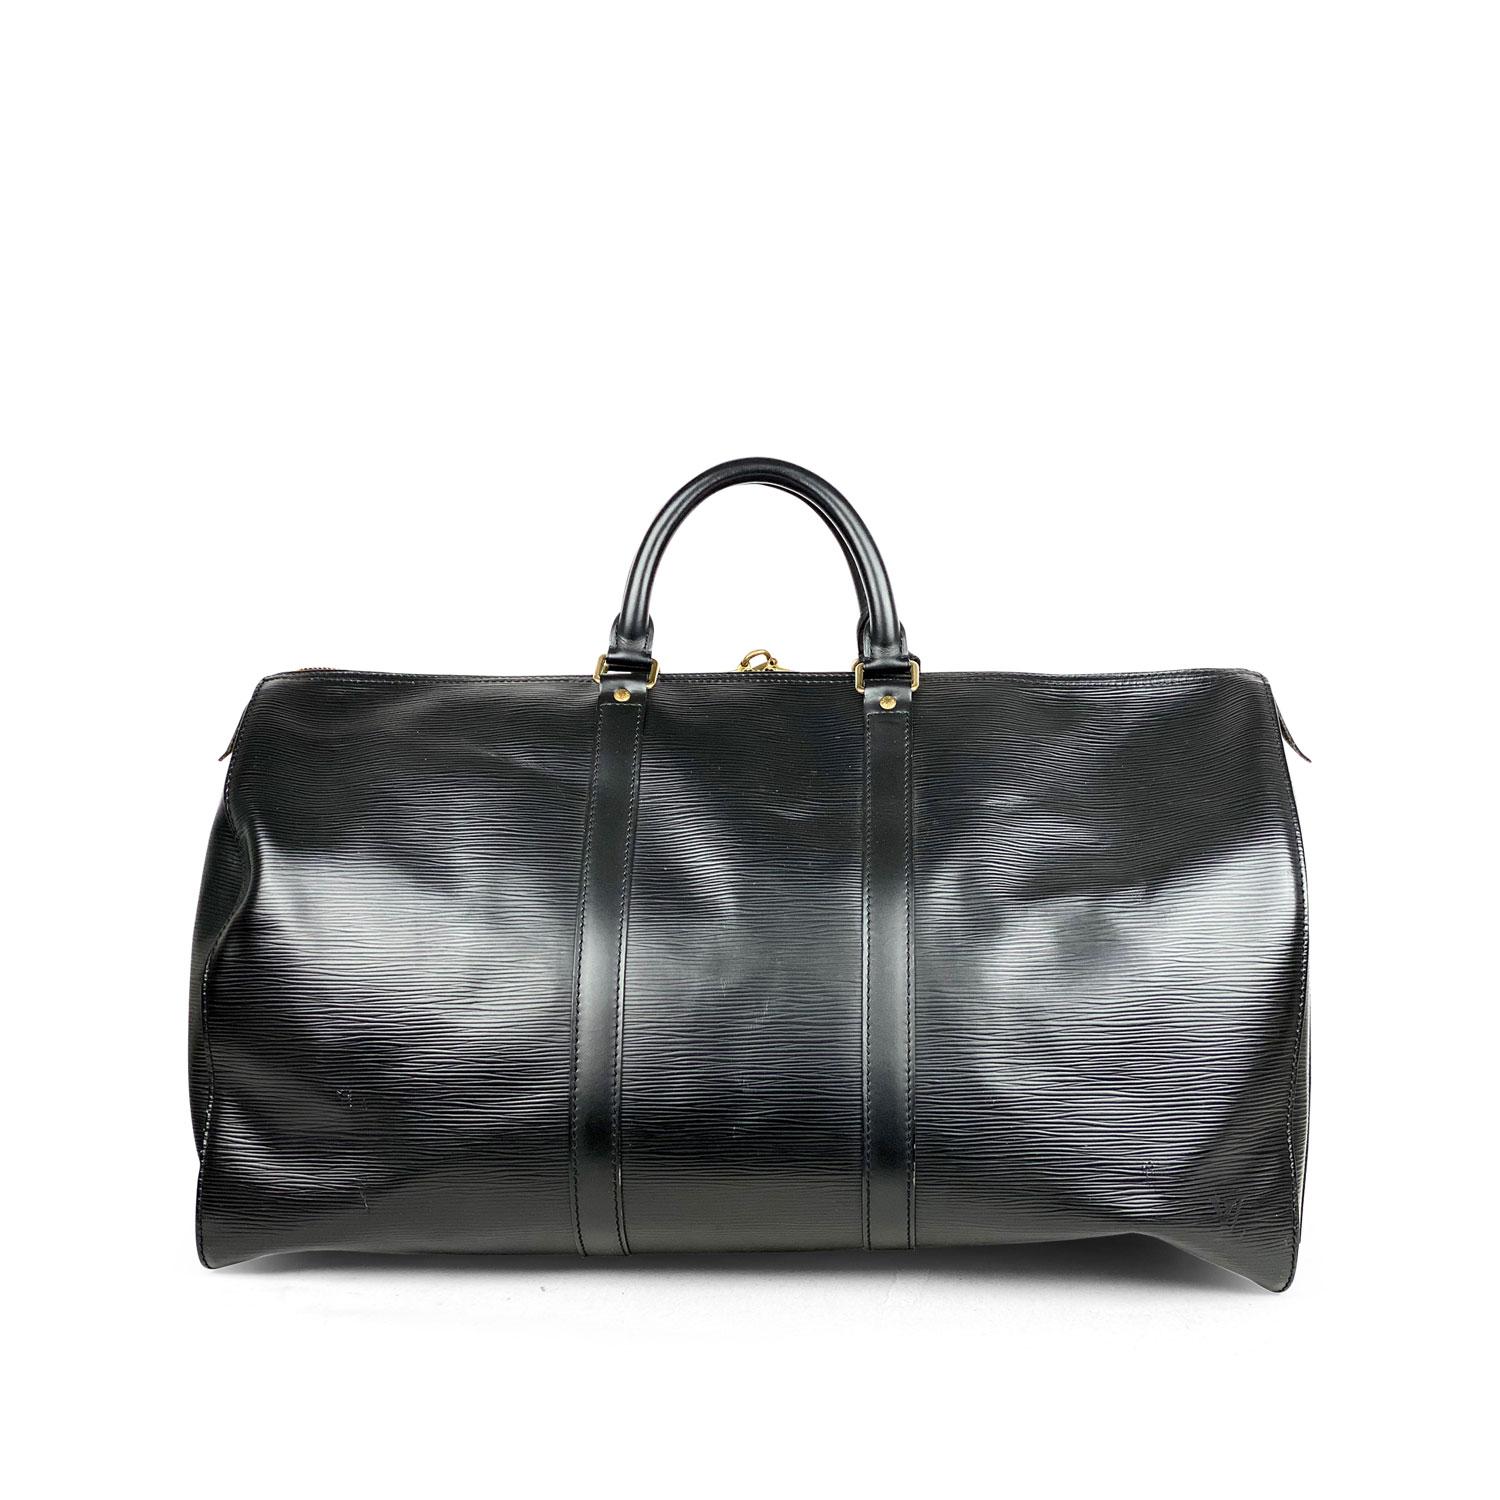 Black Epi leather Louis Vuitton Keepall 50 Weekend Bag In Good Condition For Sale In Sundbyberg, SE